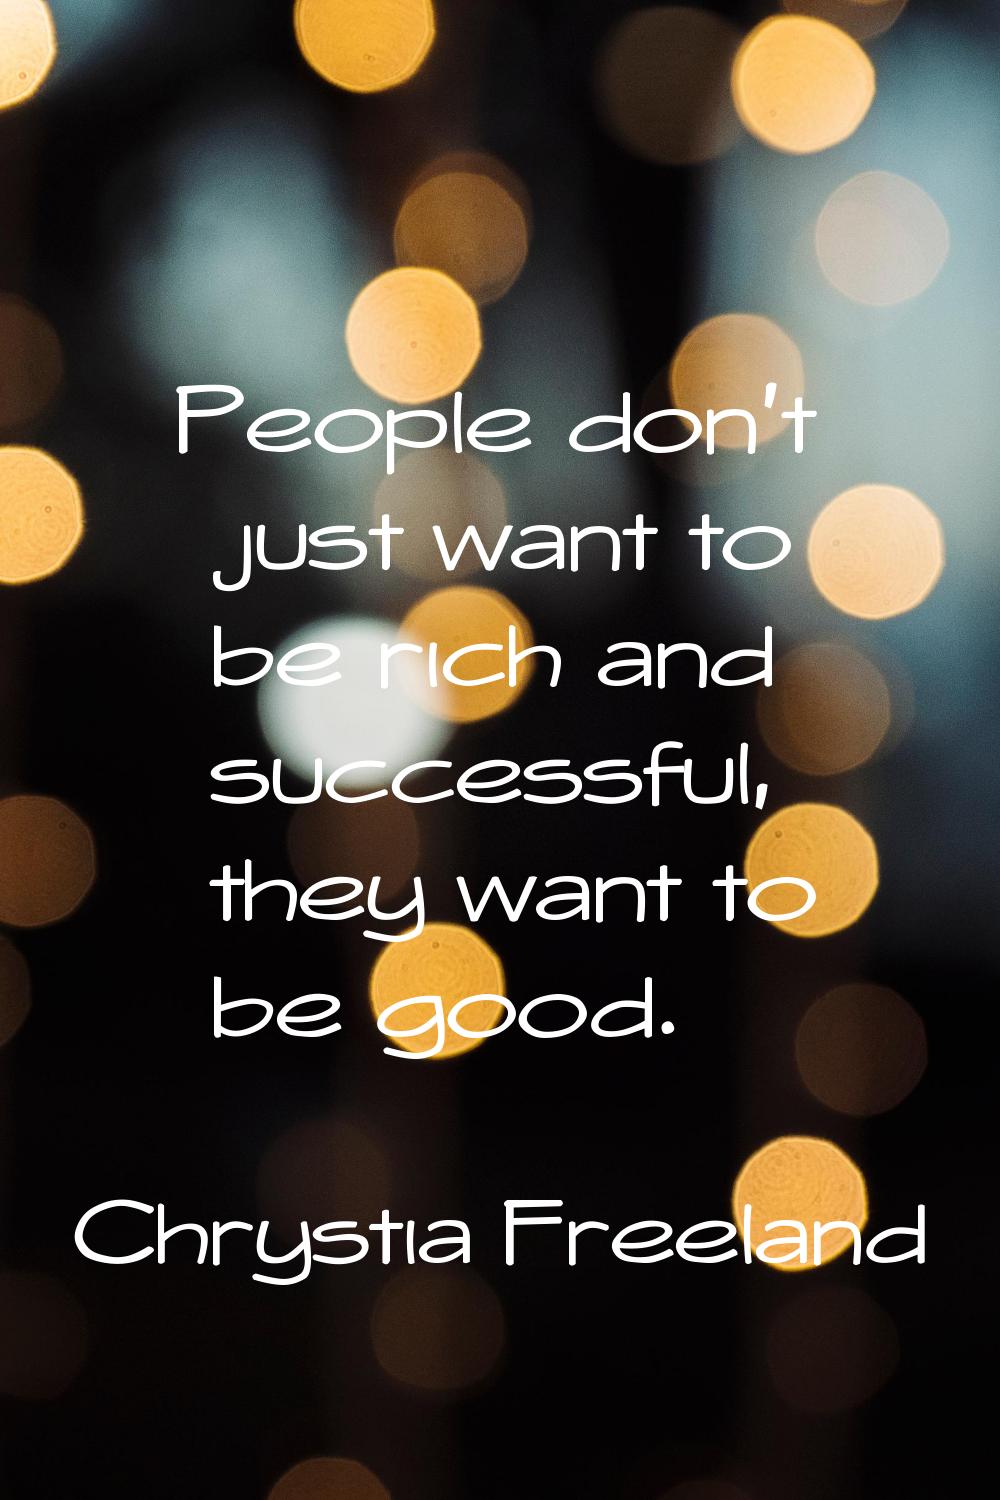 People don't just want to be rich and successful, they want to be good.